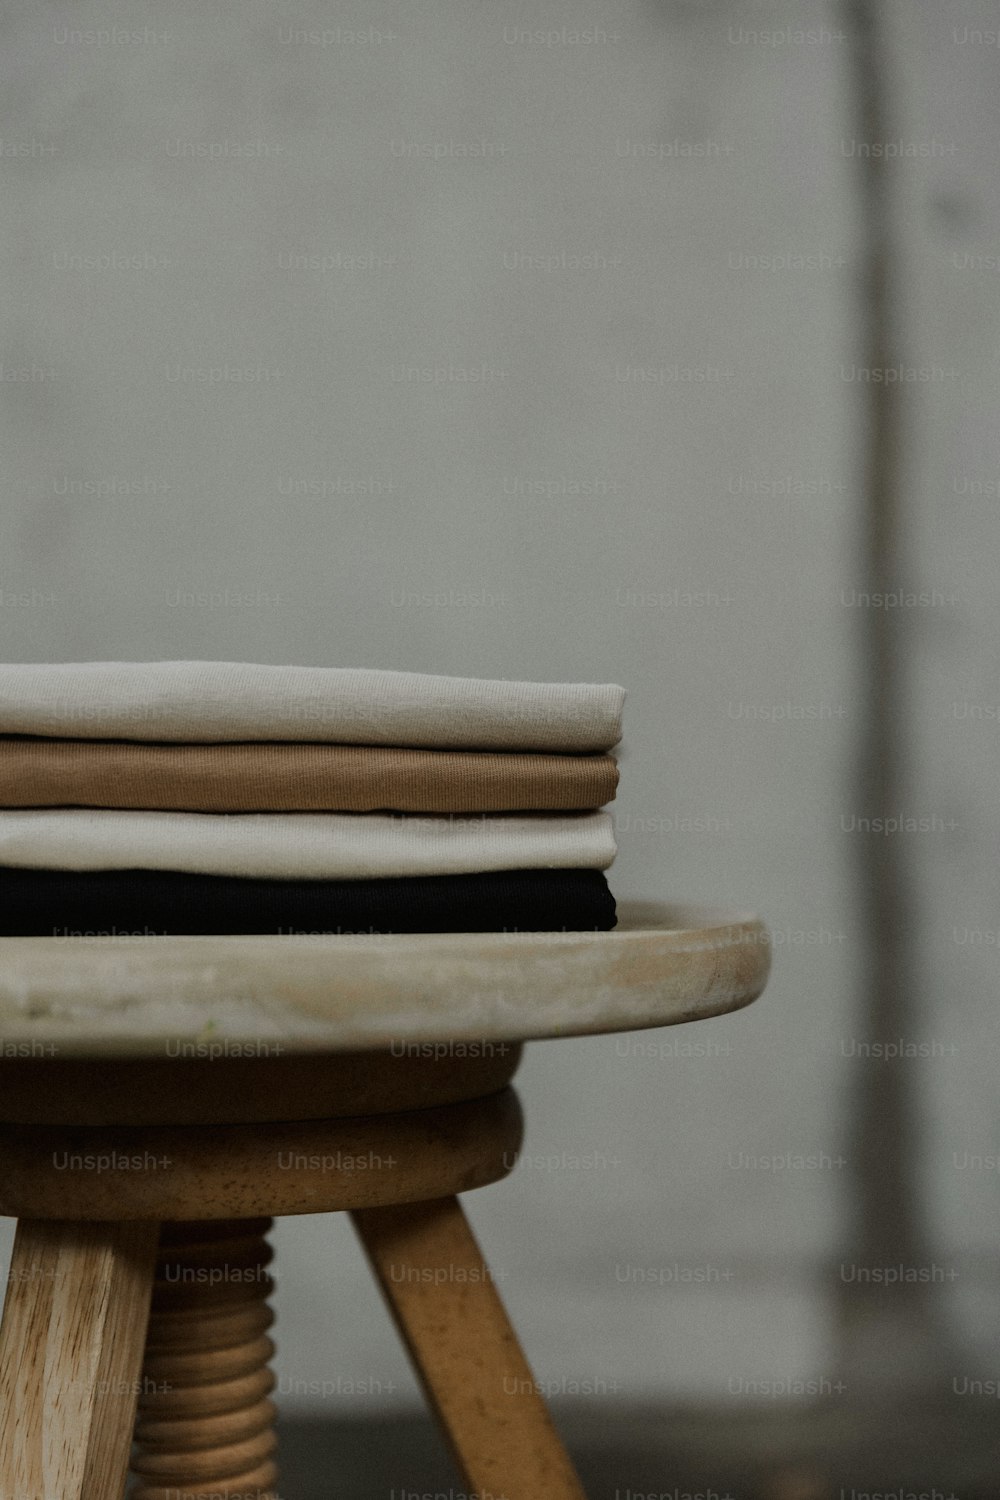 a close up of a wooden stool with a stack of cloth on top of it